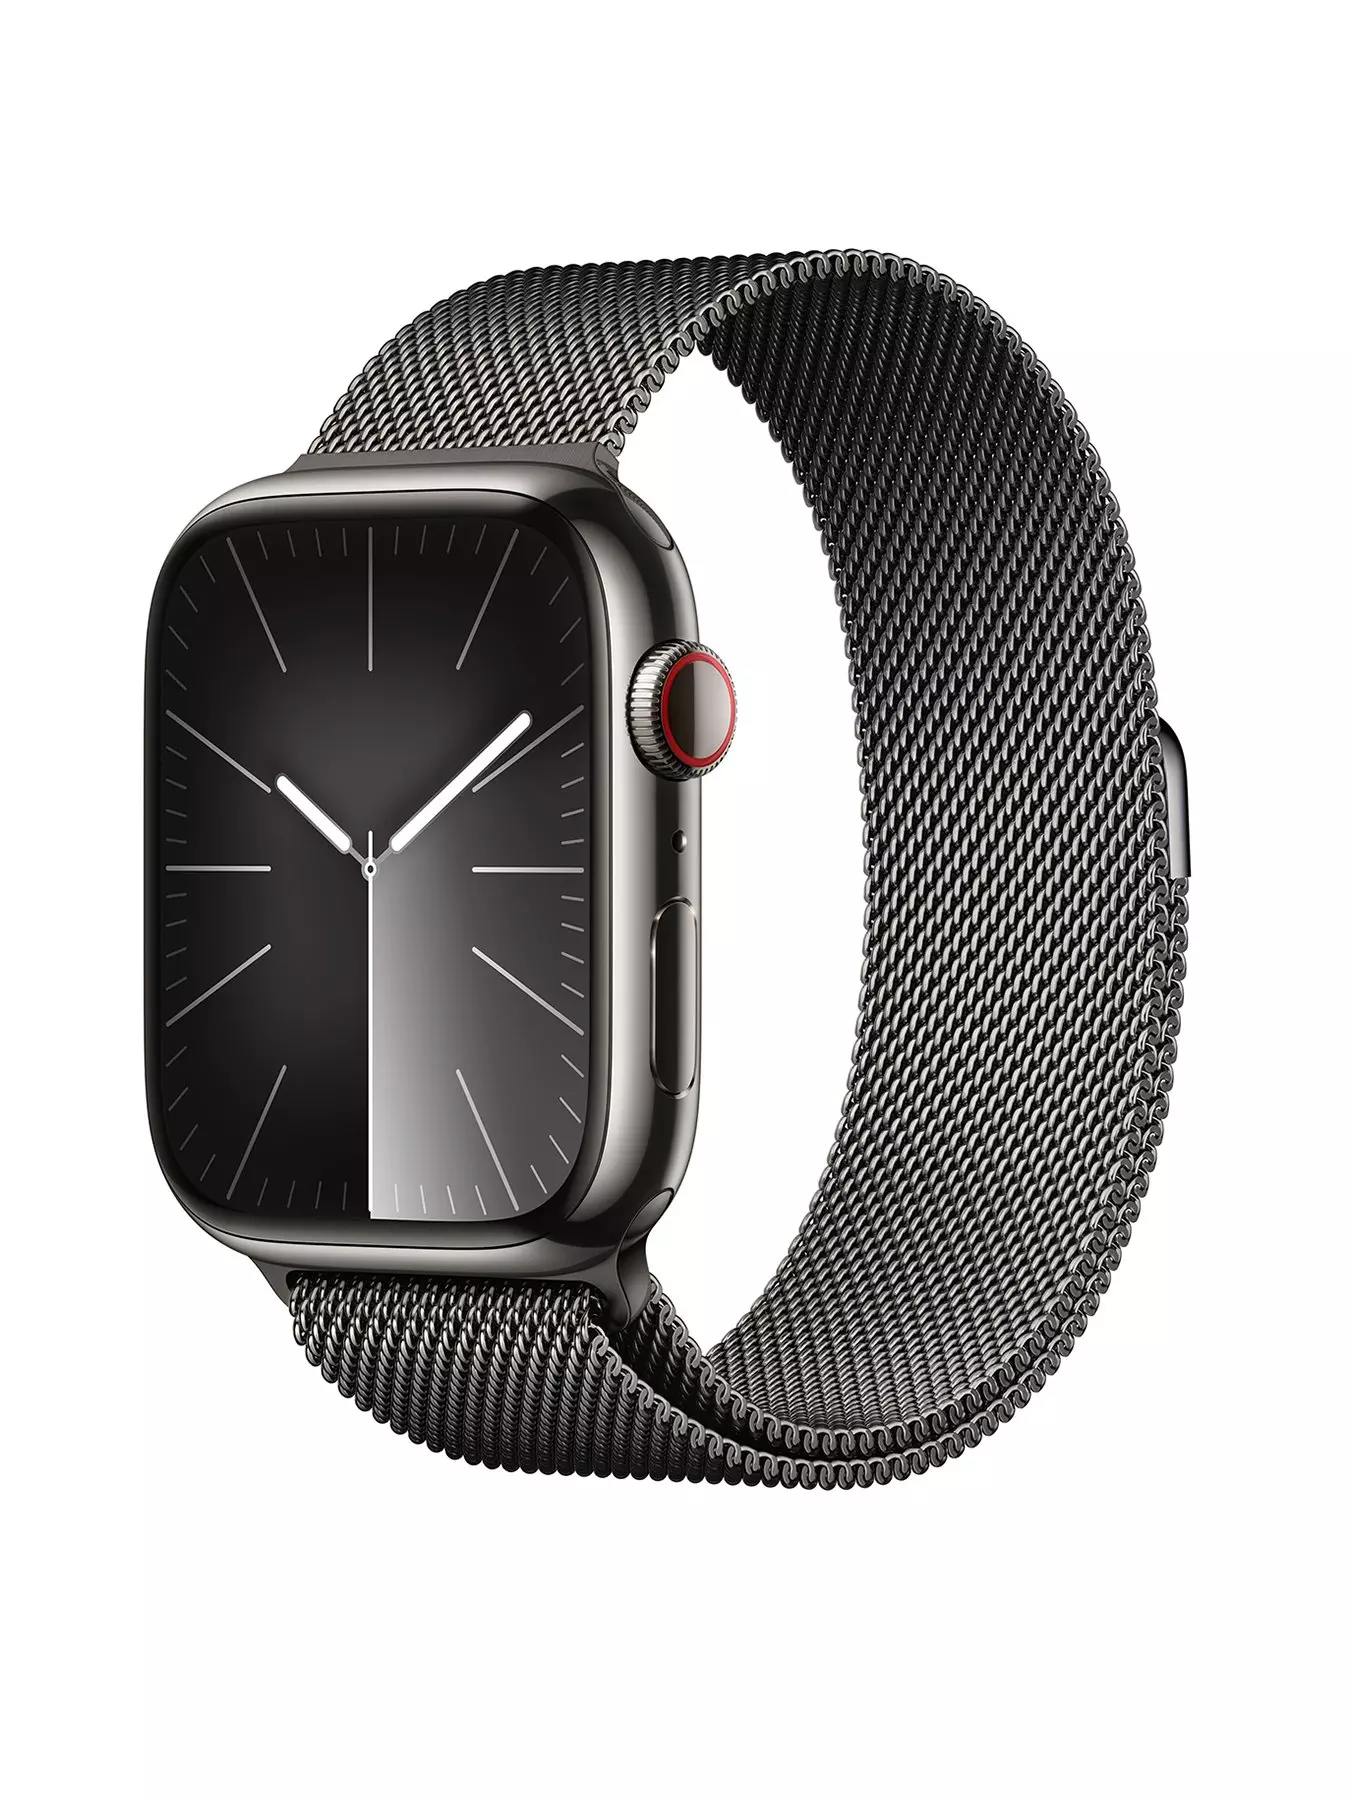 & Very Android Smartwatches Watches | Apple | Smart